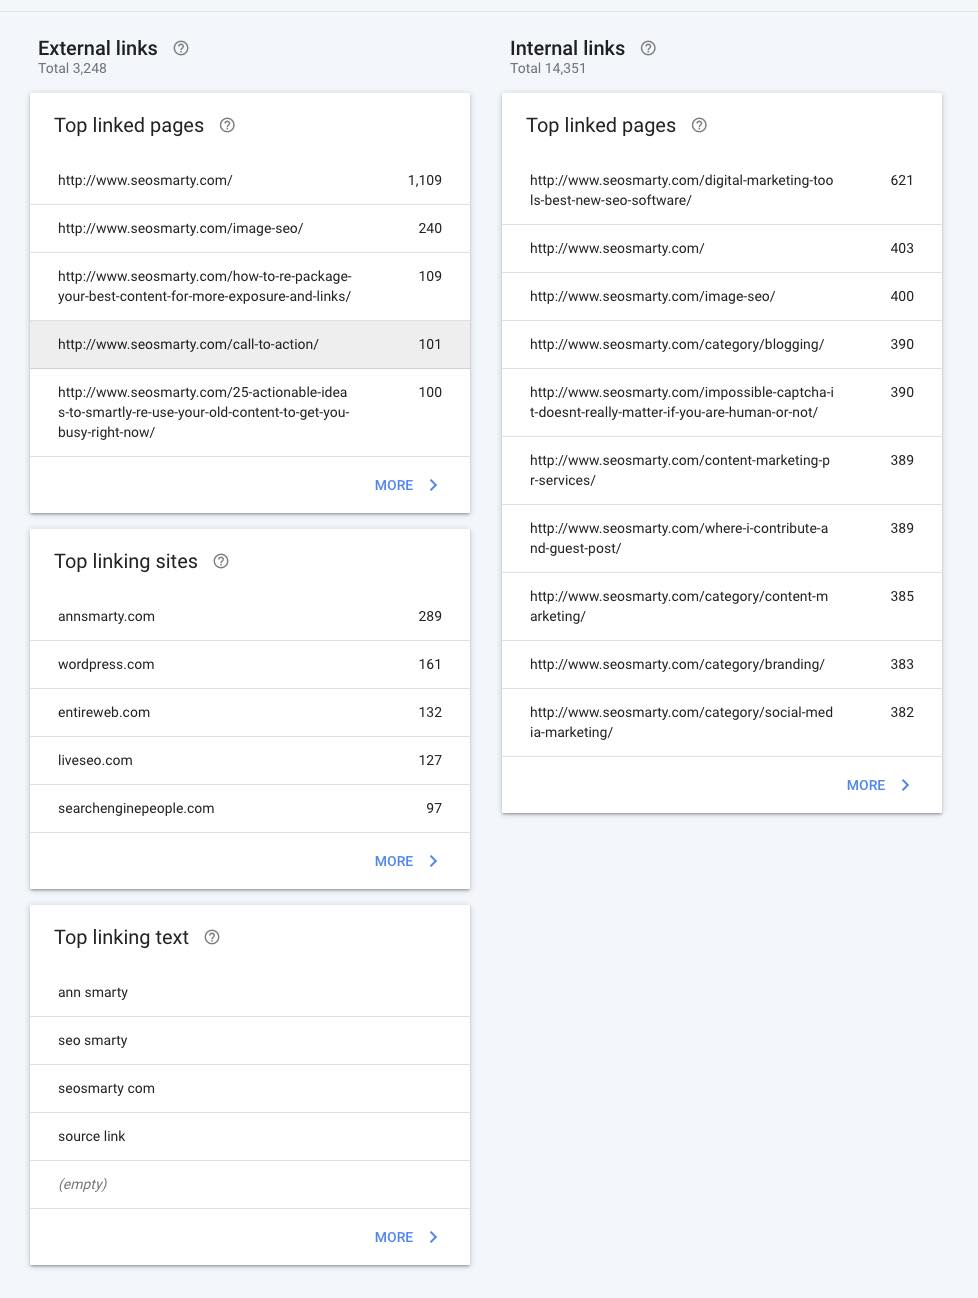 Screenshot of Links report section in Google Search Console